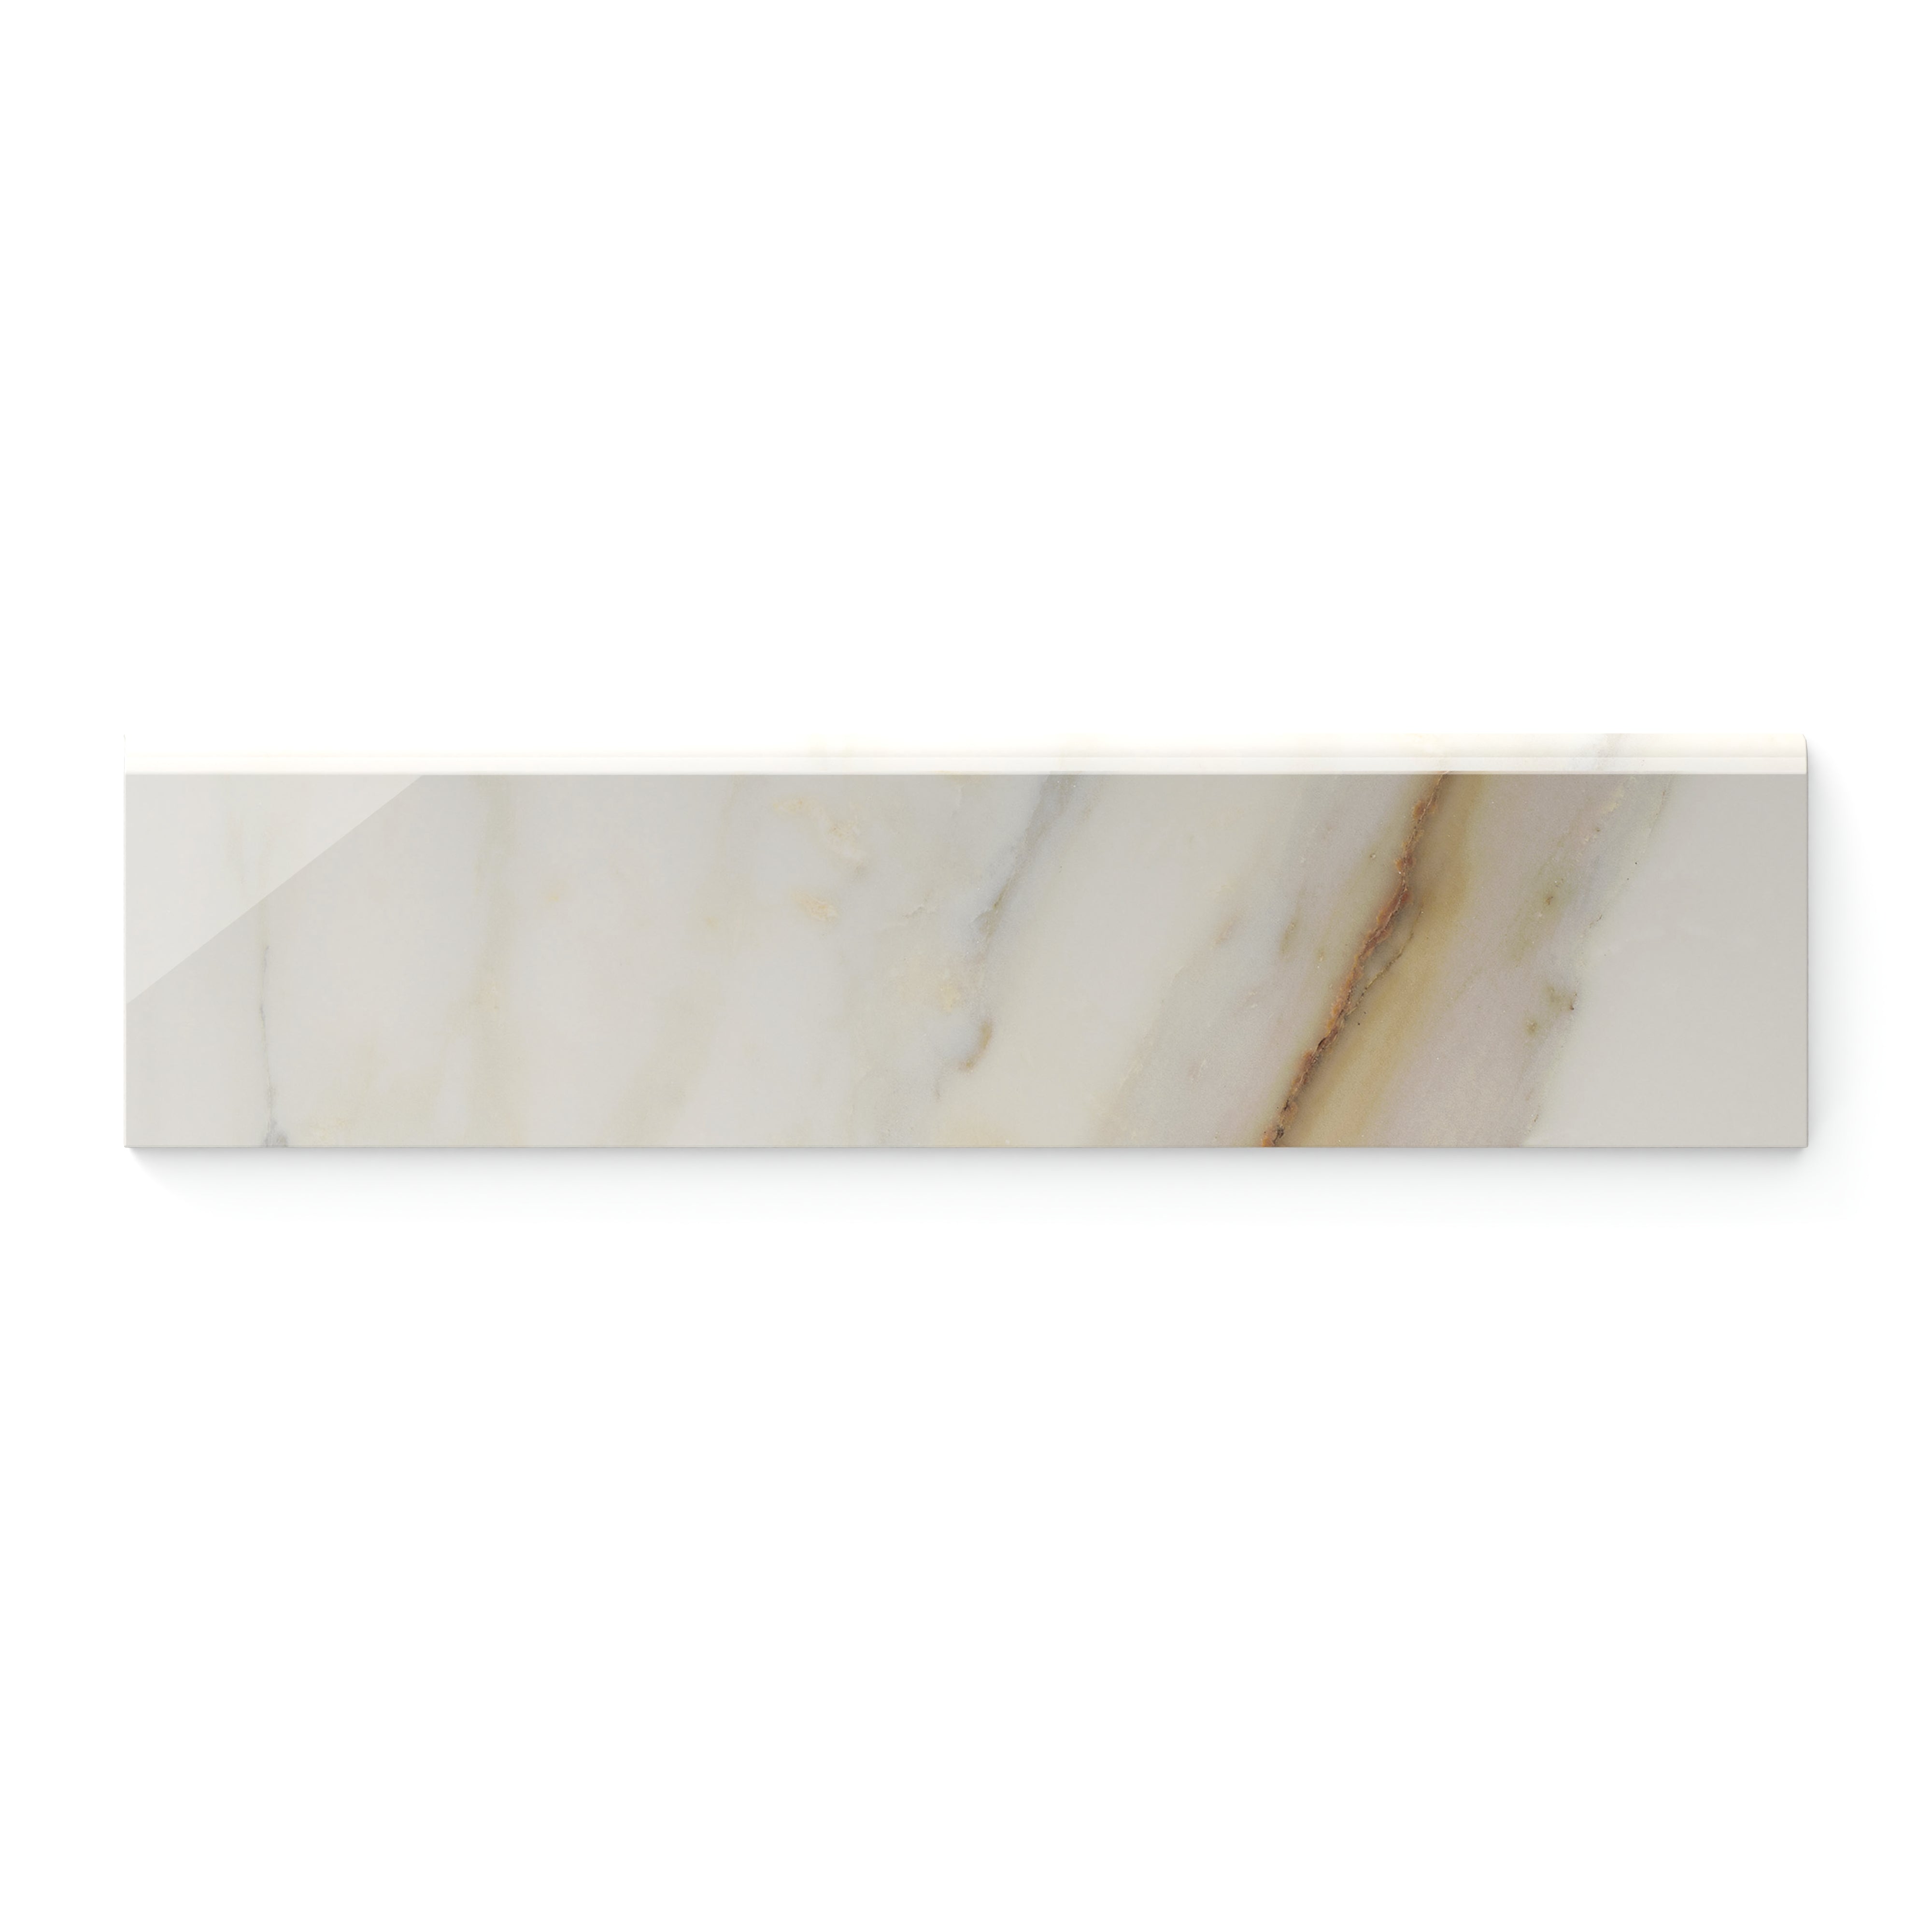 Aniston 3x12 Polished Porcelain Bullnose Tile in Calacatta Cremo